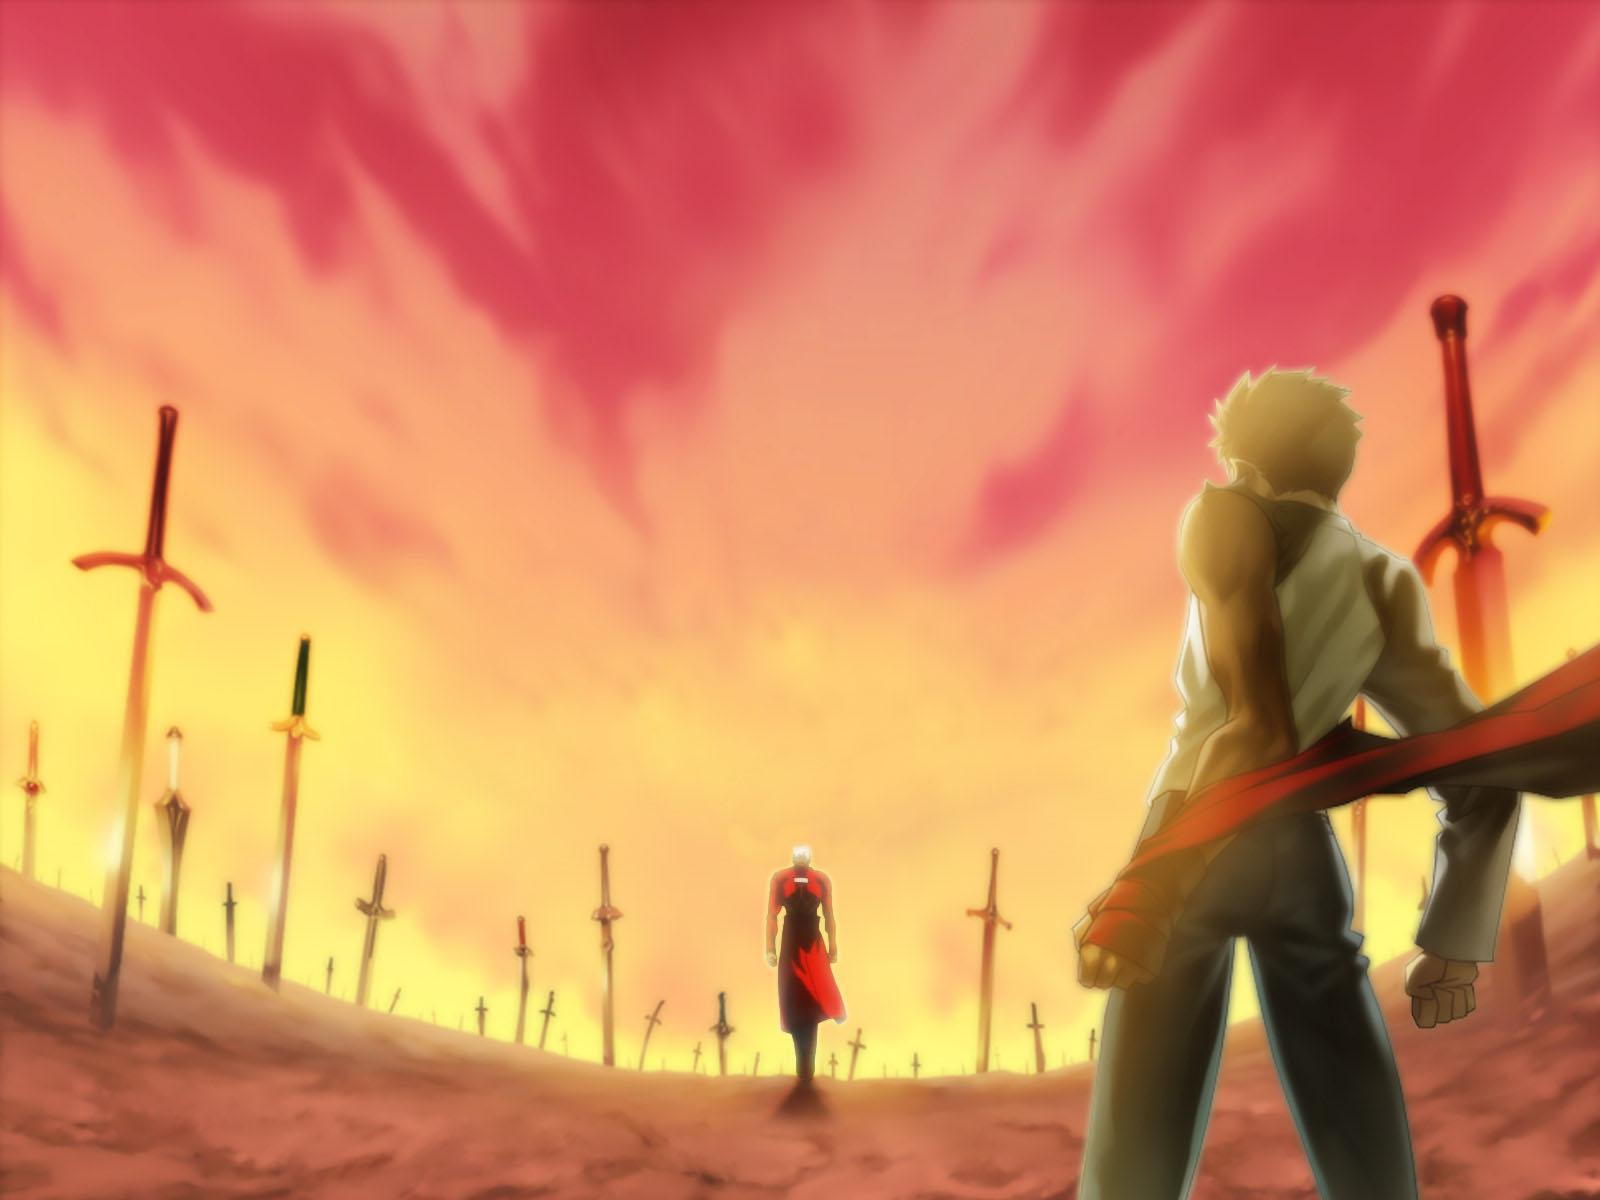 Shirou Emiya and Archer from the anime Fate/Stay Night: Unlimited Blade Works on a vibrant desktop wallpaper.